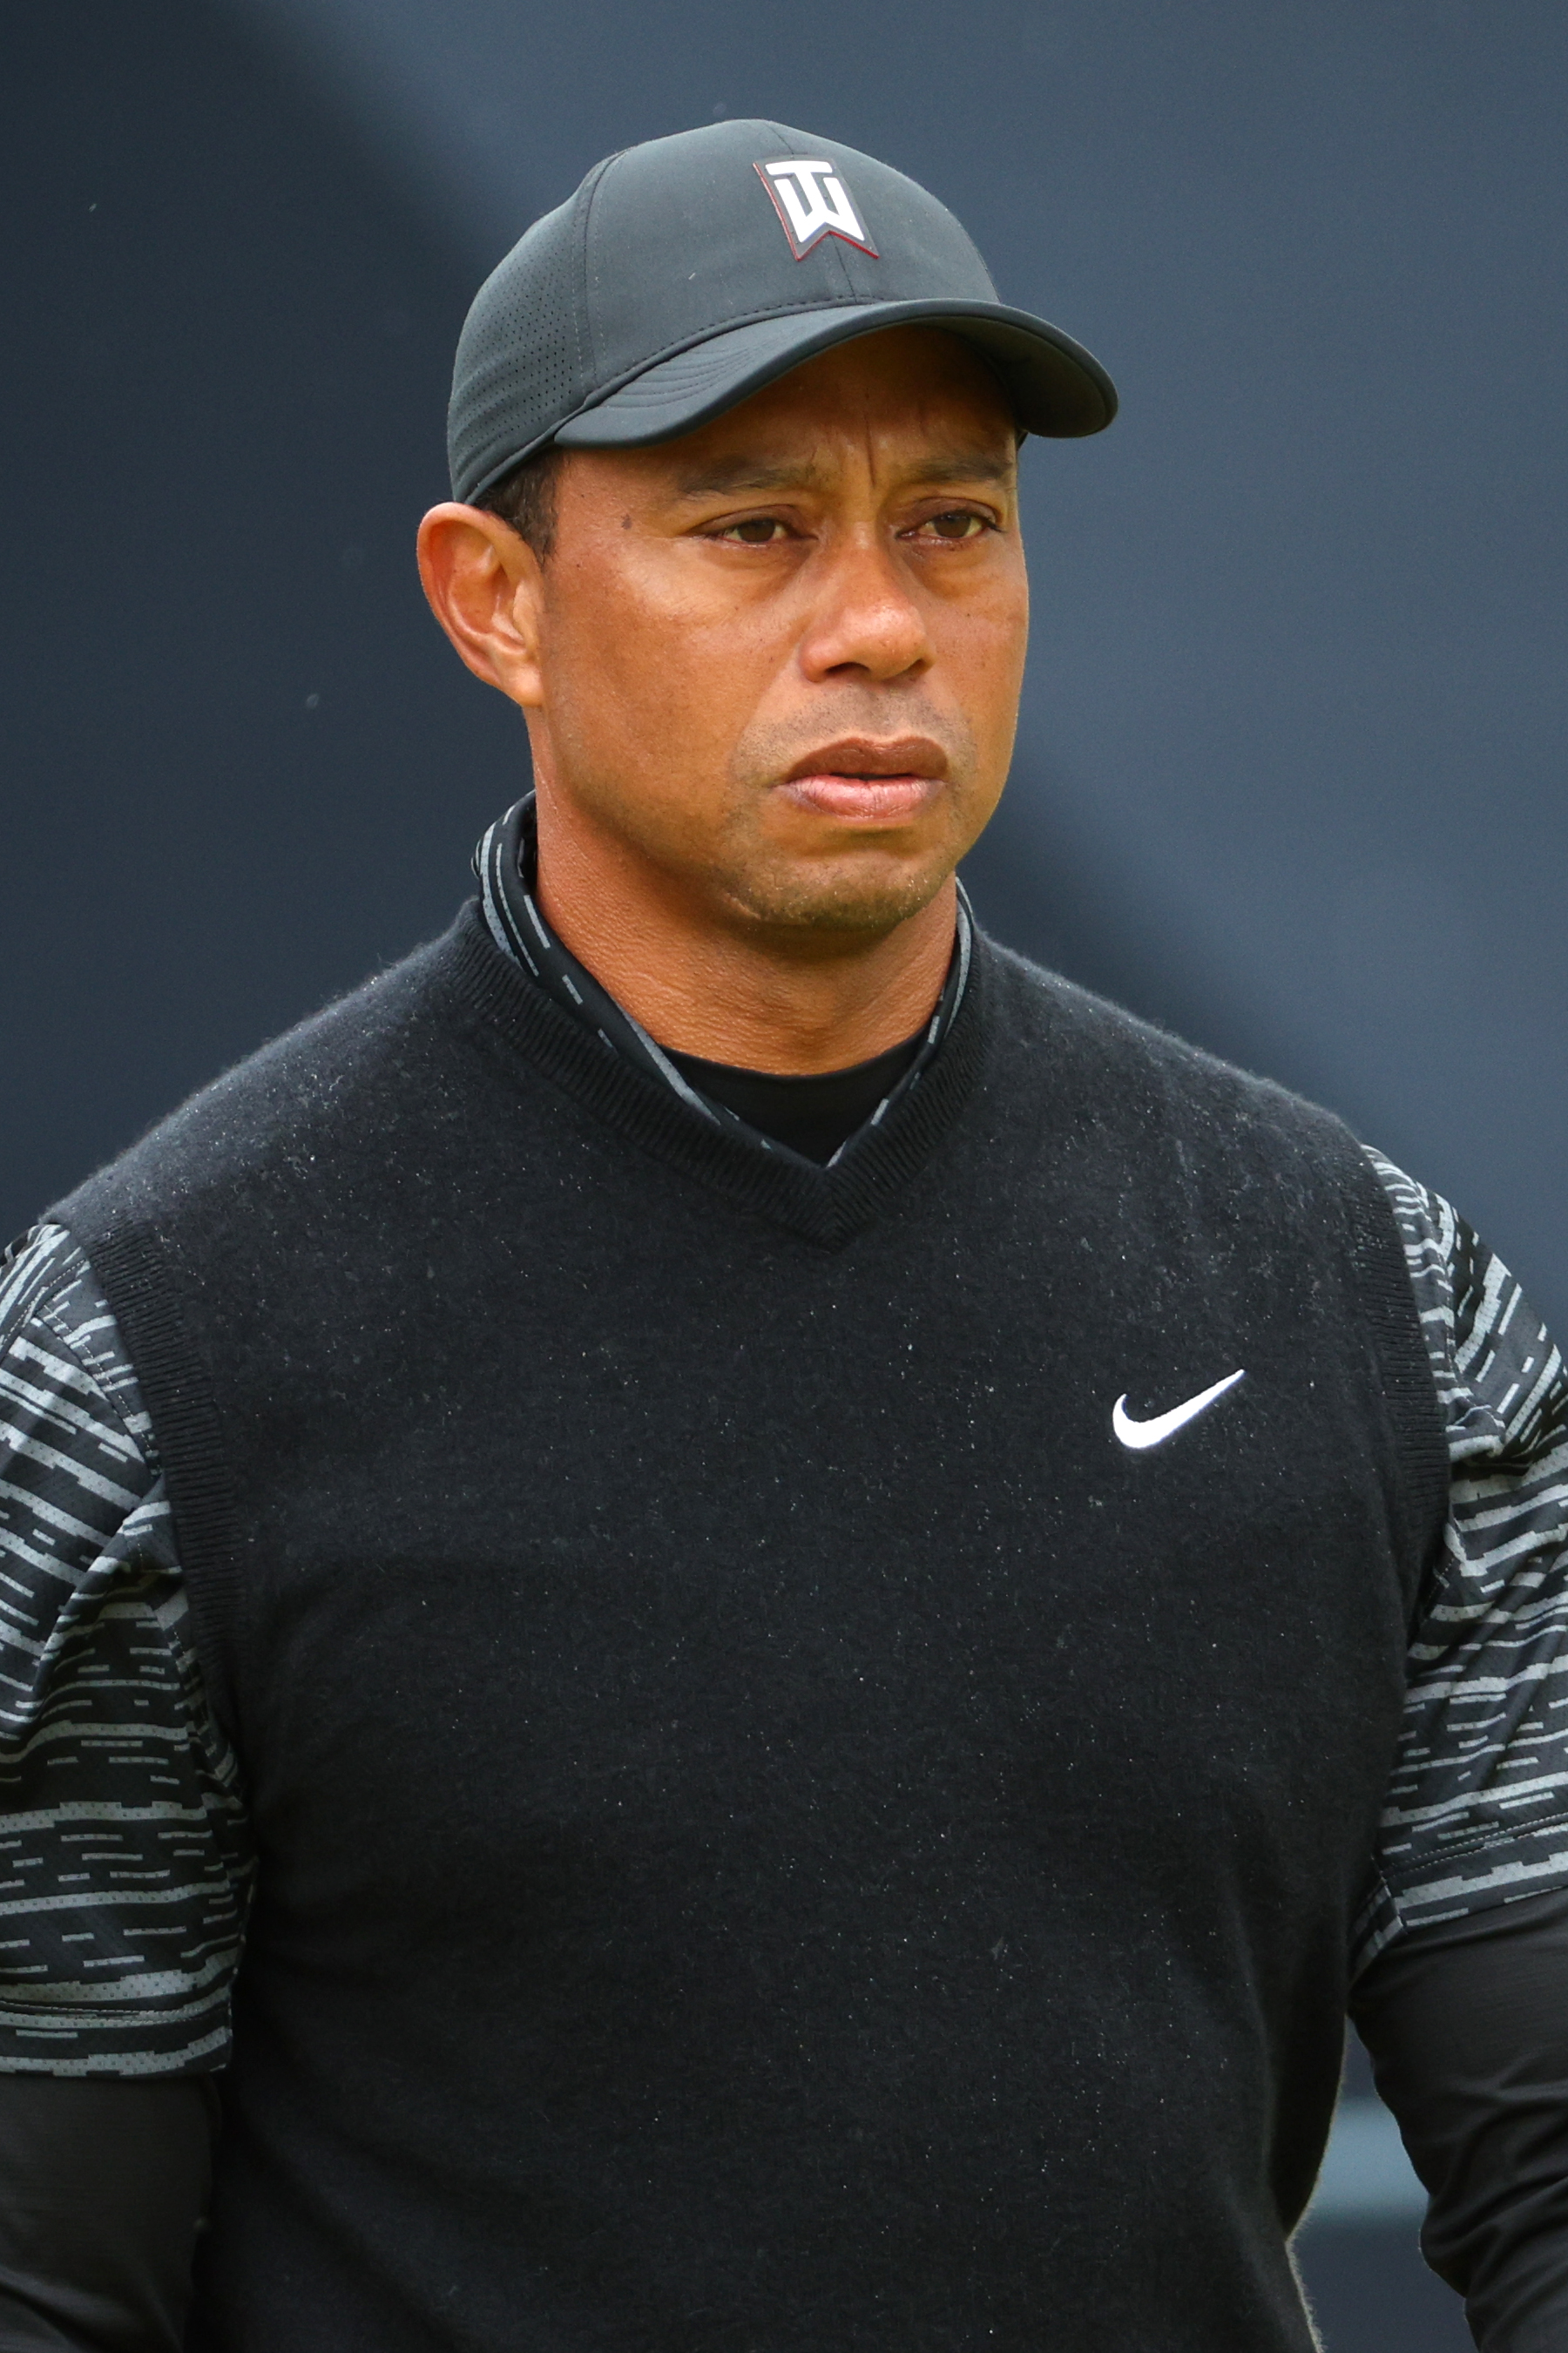 Tiger Woods of the United States looks on during a practice round prior to The 150th Open at St Andrews Old Course on July 13, 2022 in St Andrews, Scotland.